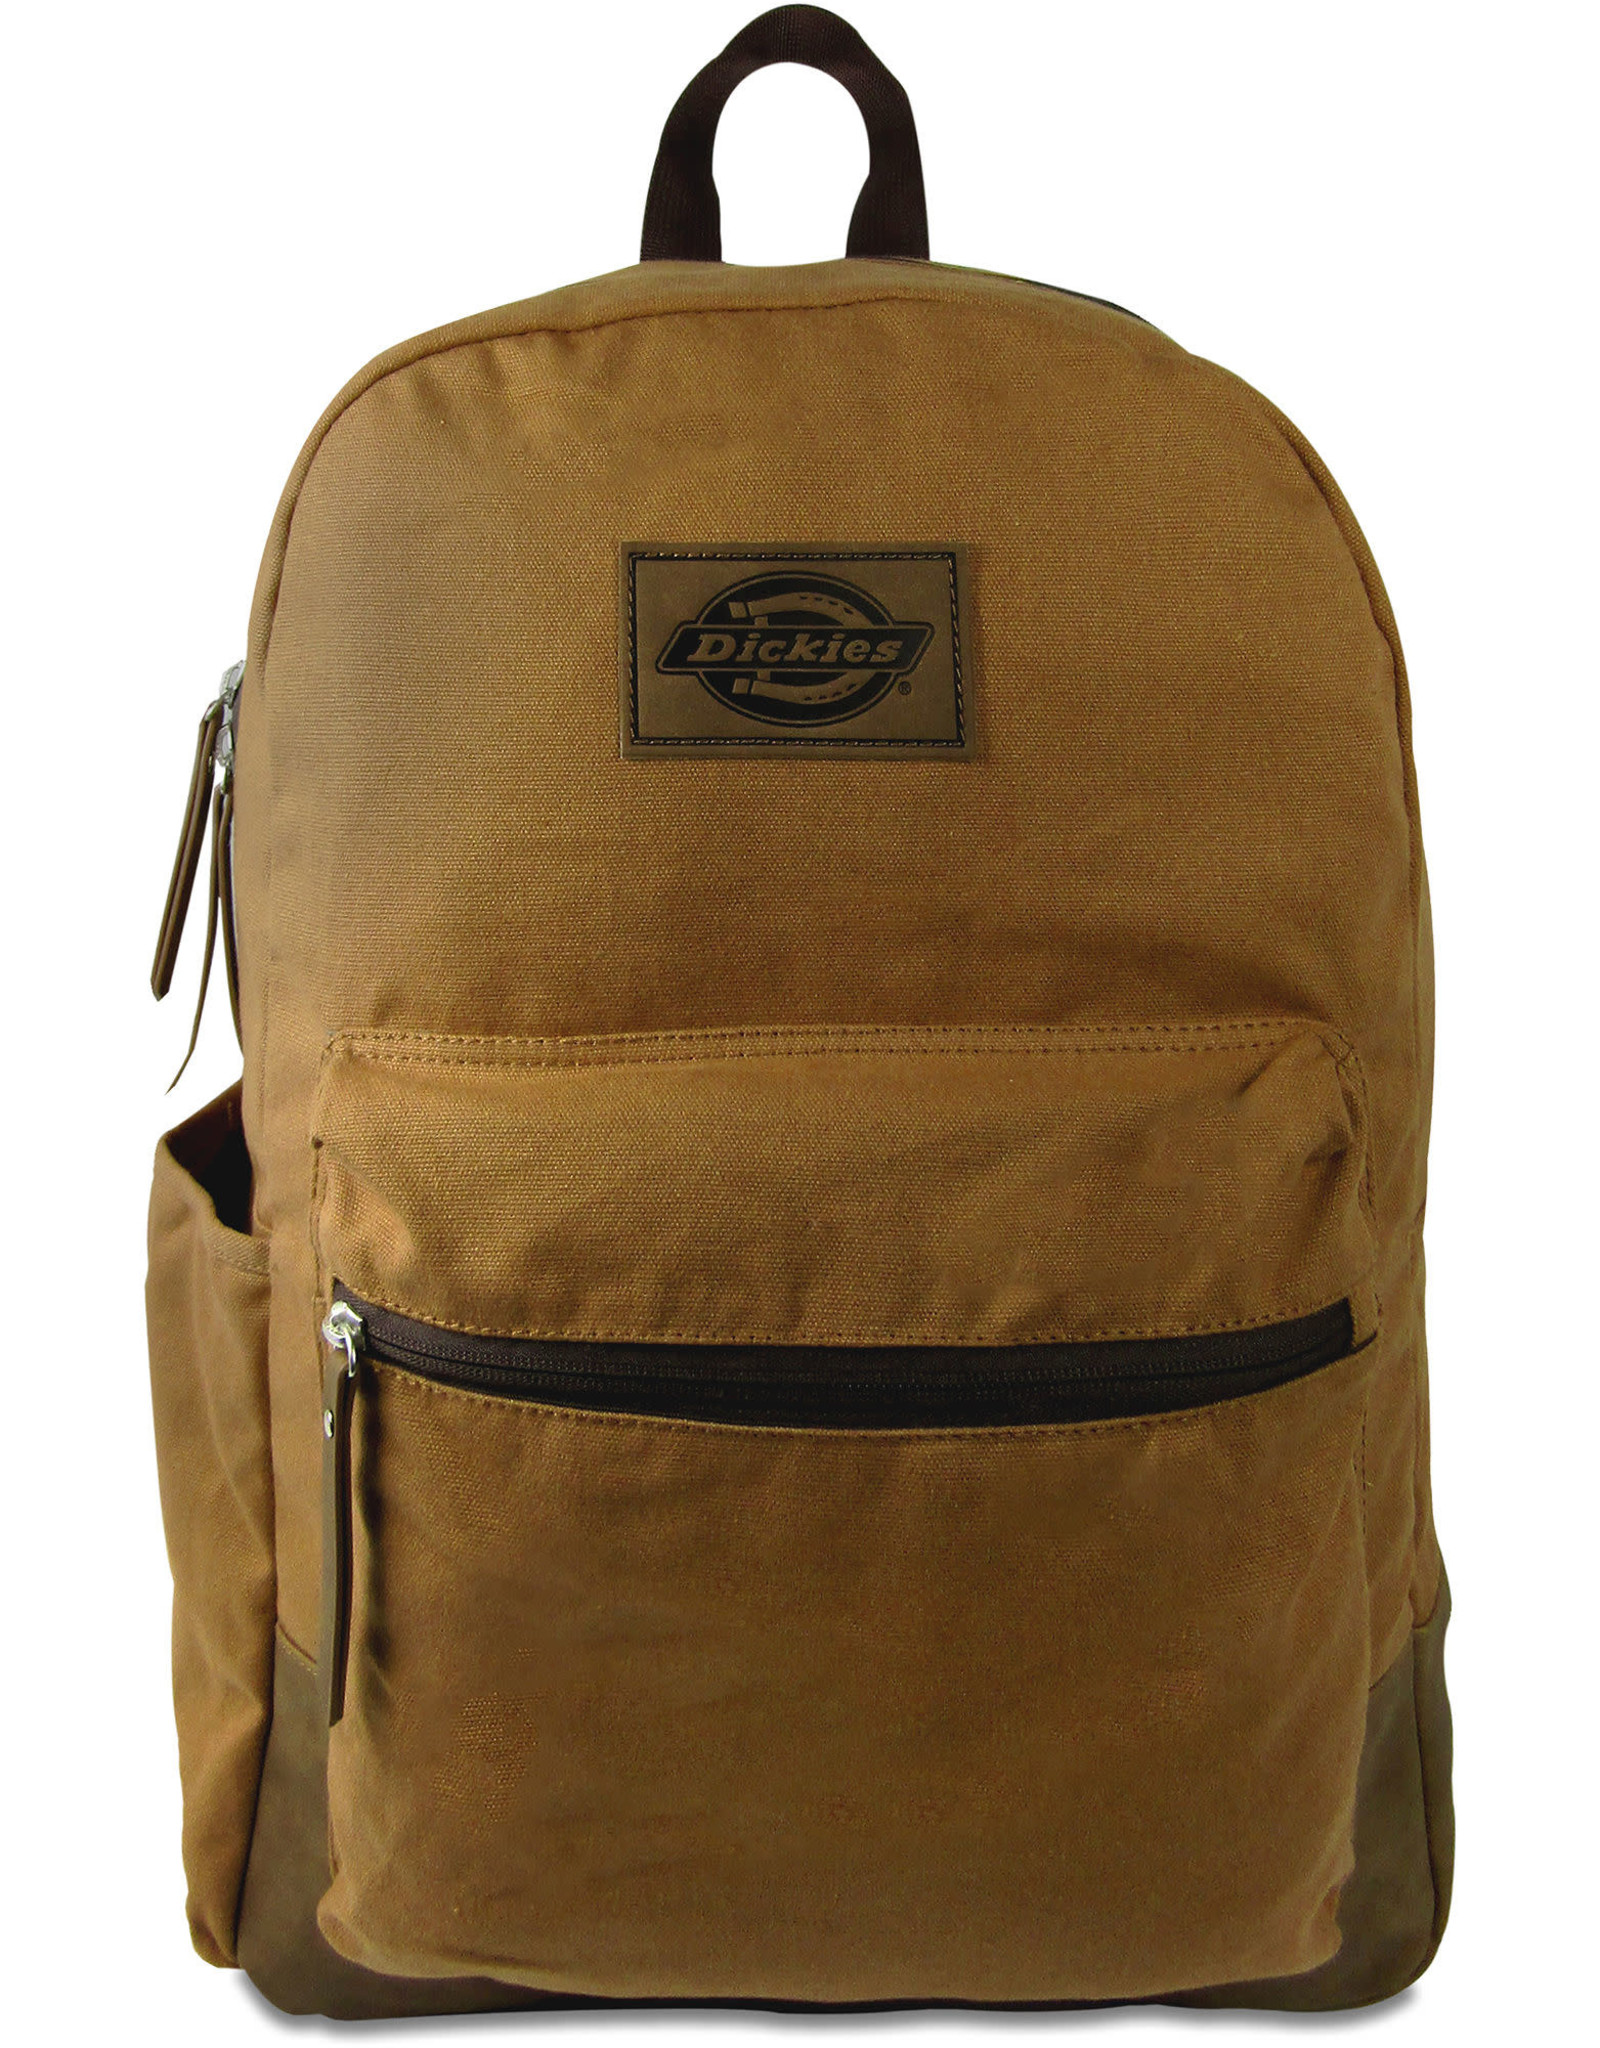 DICKIES Colton Canvas Bag